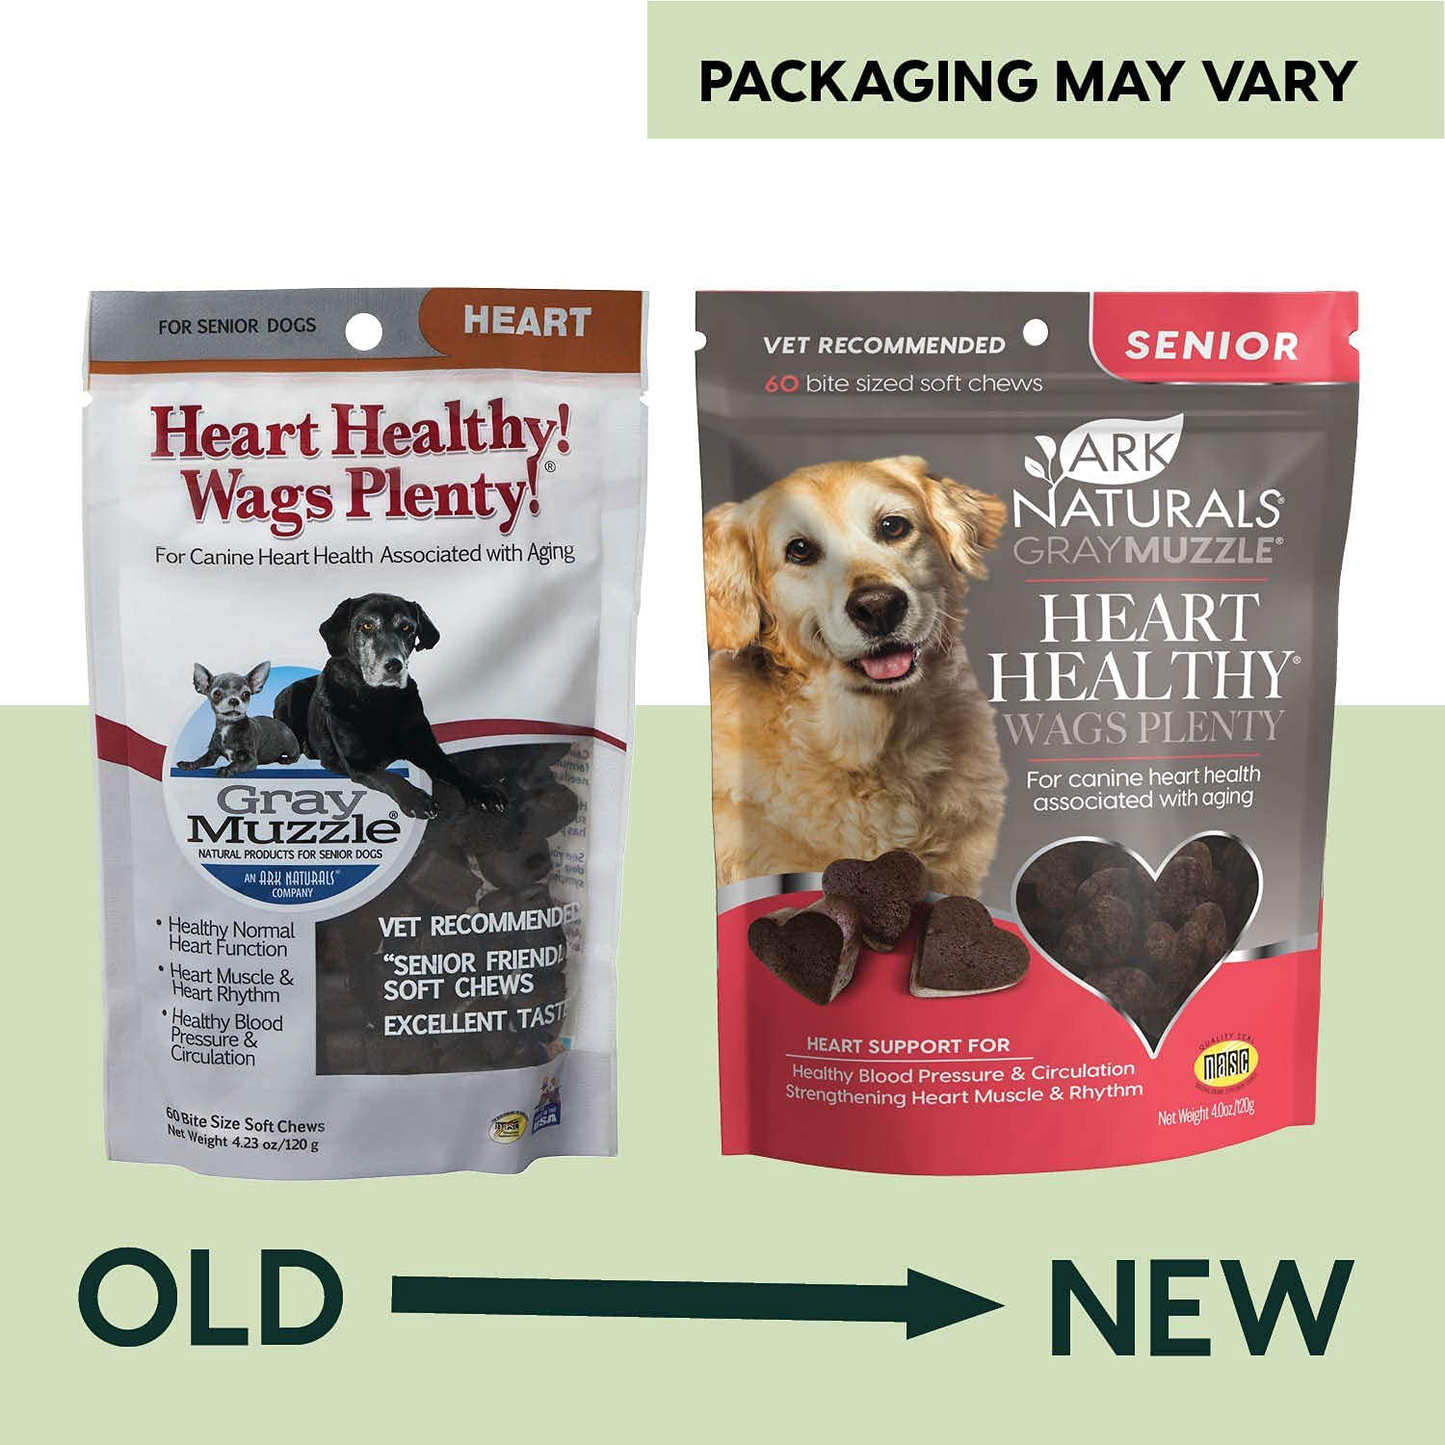 Ark Naturals Gray Muzzle Heart Healthy Wags Plenty Dog Chews, Vet Recommended for Senior Dogs to Support Heart Muscle, Blood Pressure and Circulation, Natural Ingredients, 60 Count Animals & Pet Supplies > Pet Supplies > Small Animal Supplies > Small Animal Treats Ark Naturals   